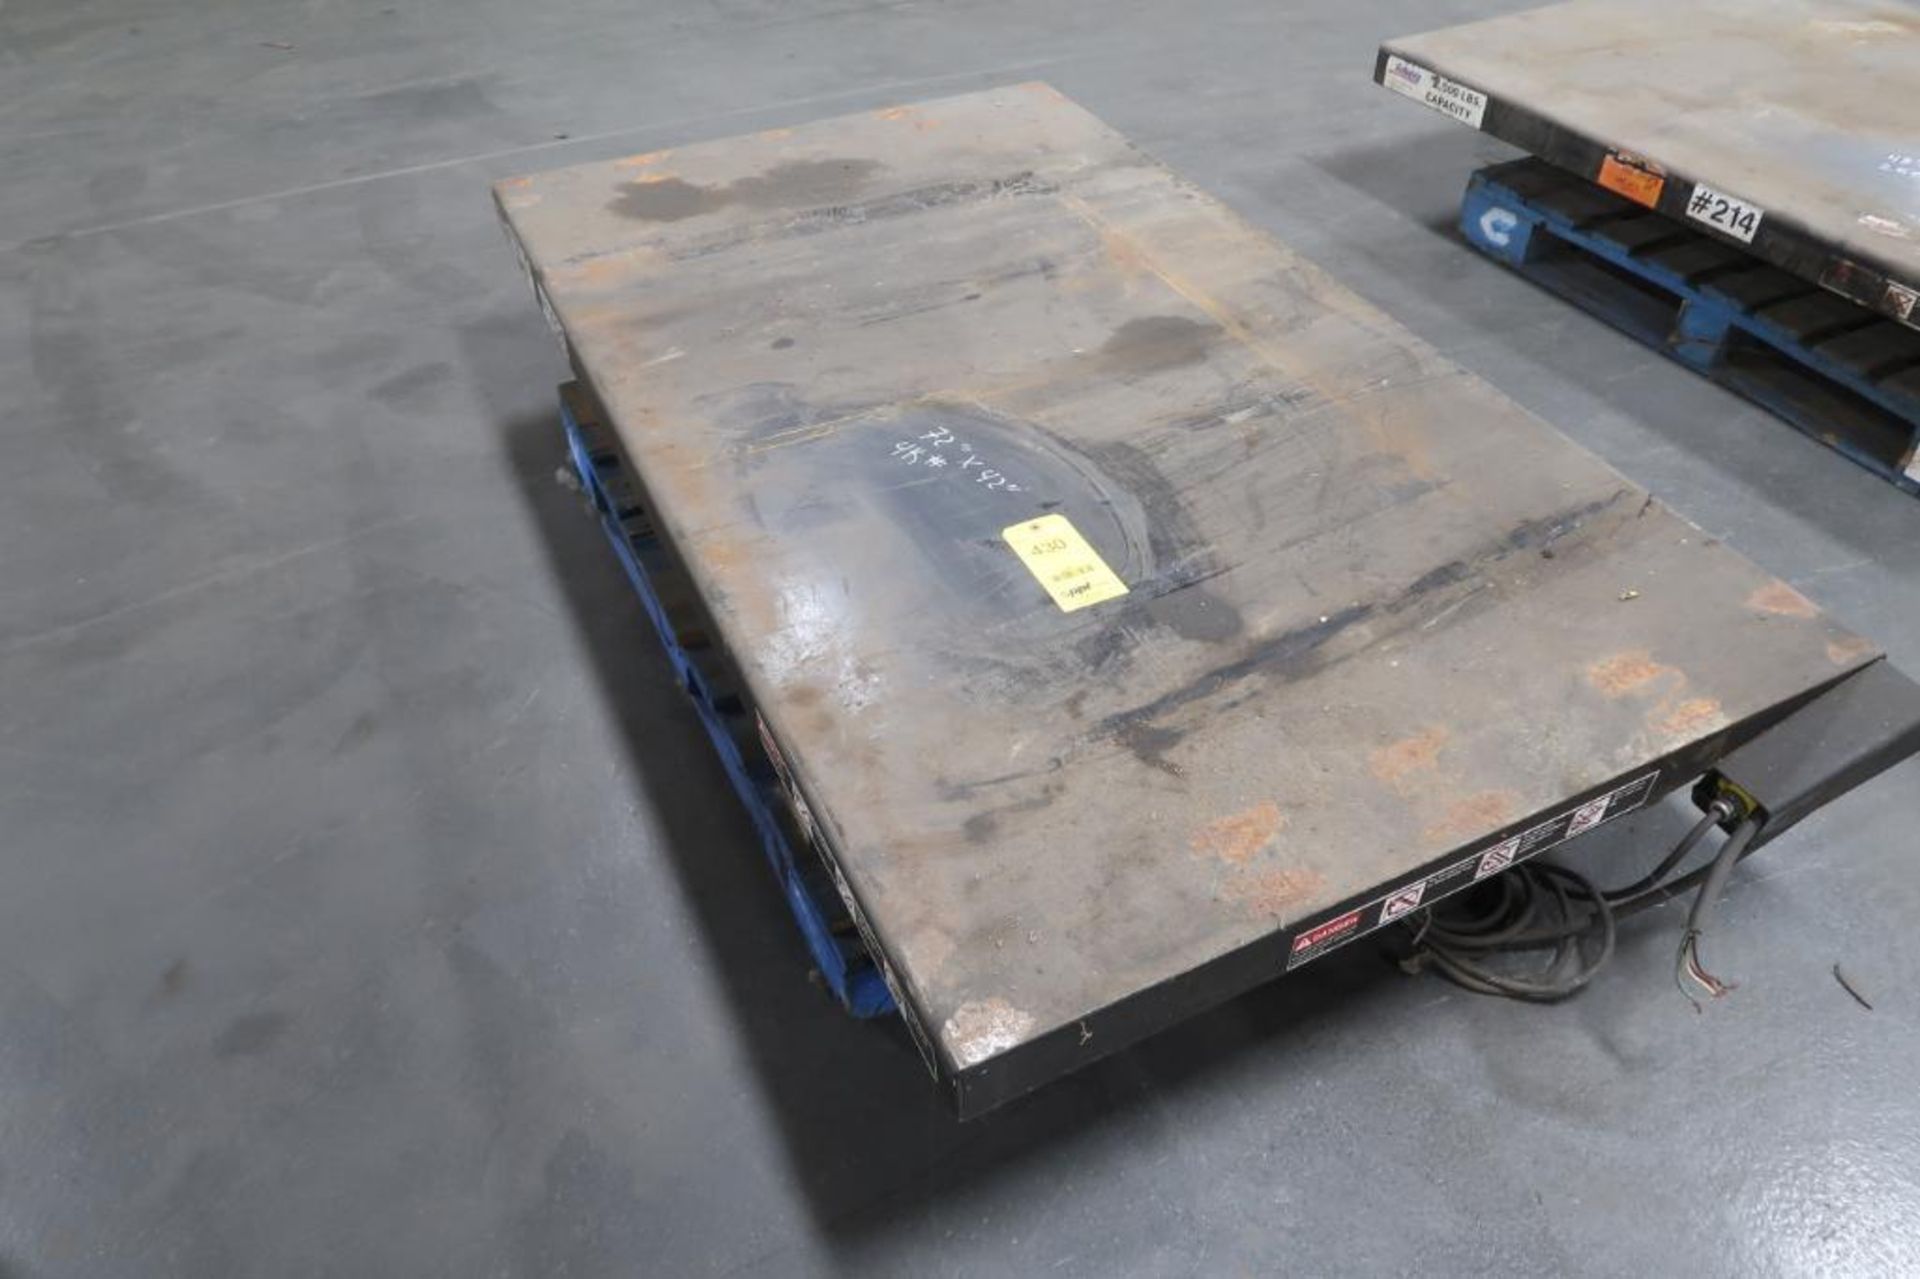 AutoQuip 42 in. x 72 in., 4000 lb. Electric Lift Table, LOCATION: MAIN PRESS FLOOR